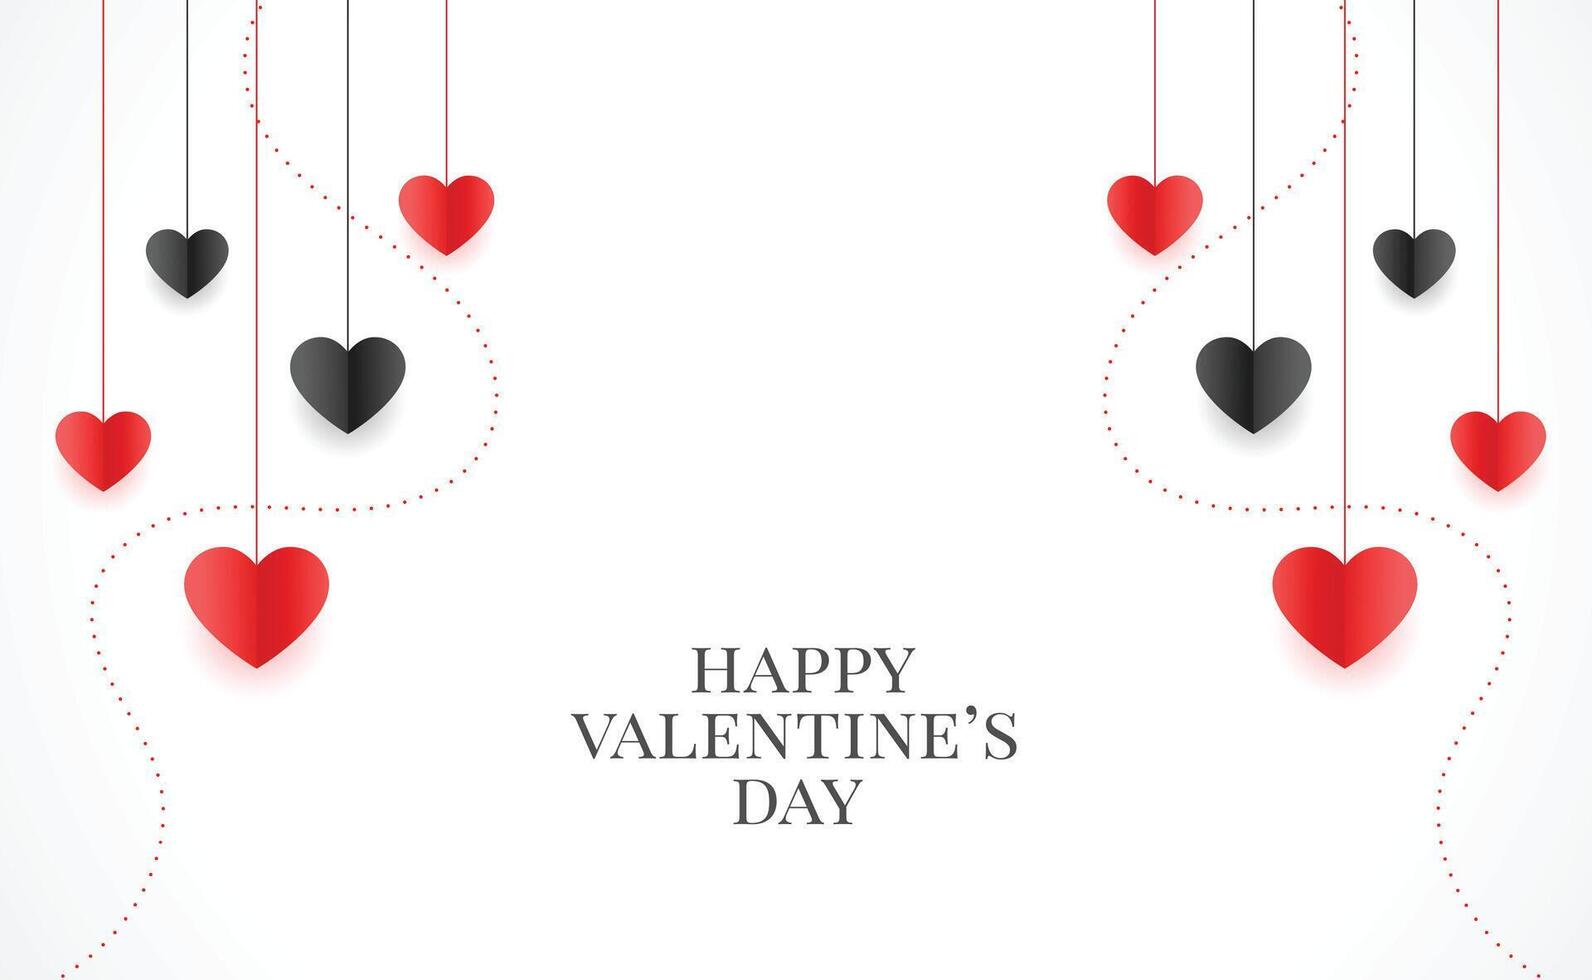 stylish valentines day poster with hanging hearts vector